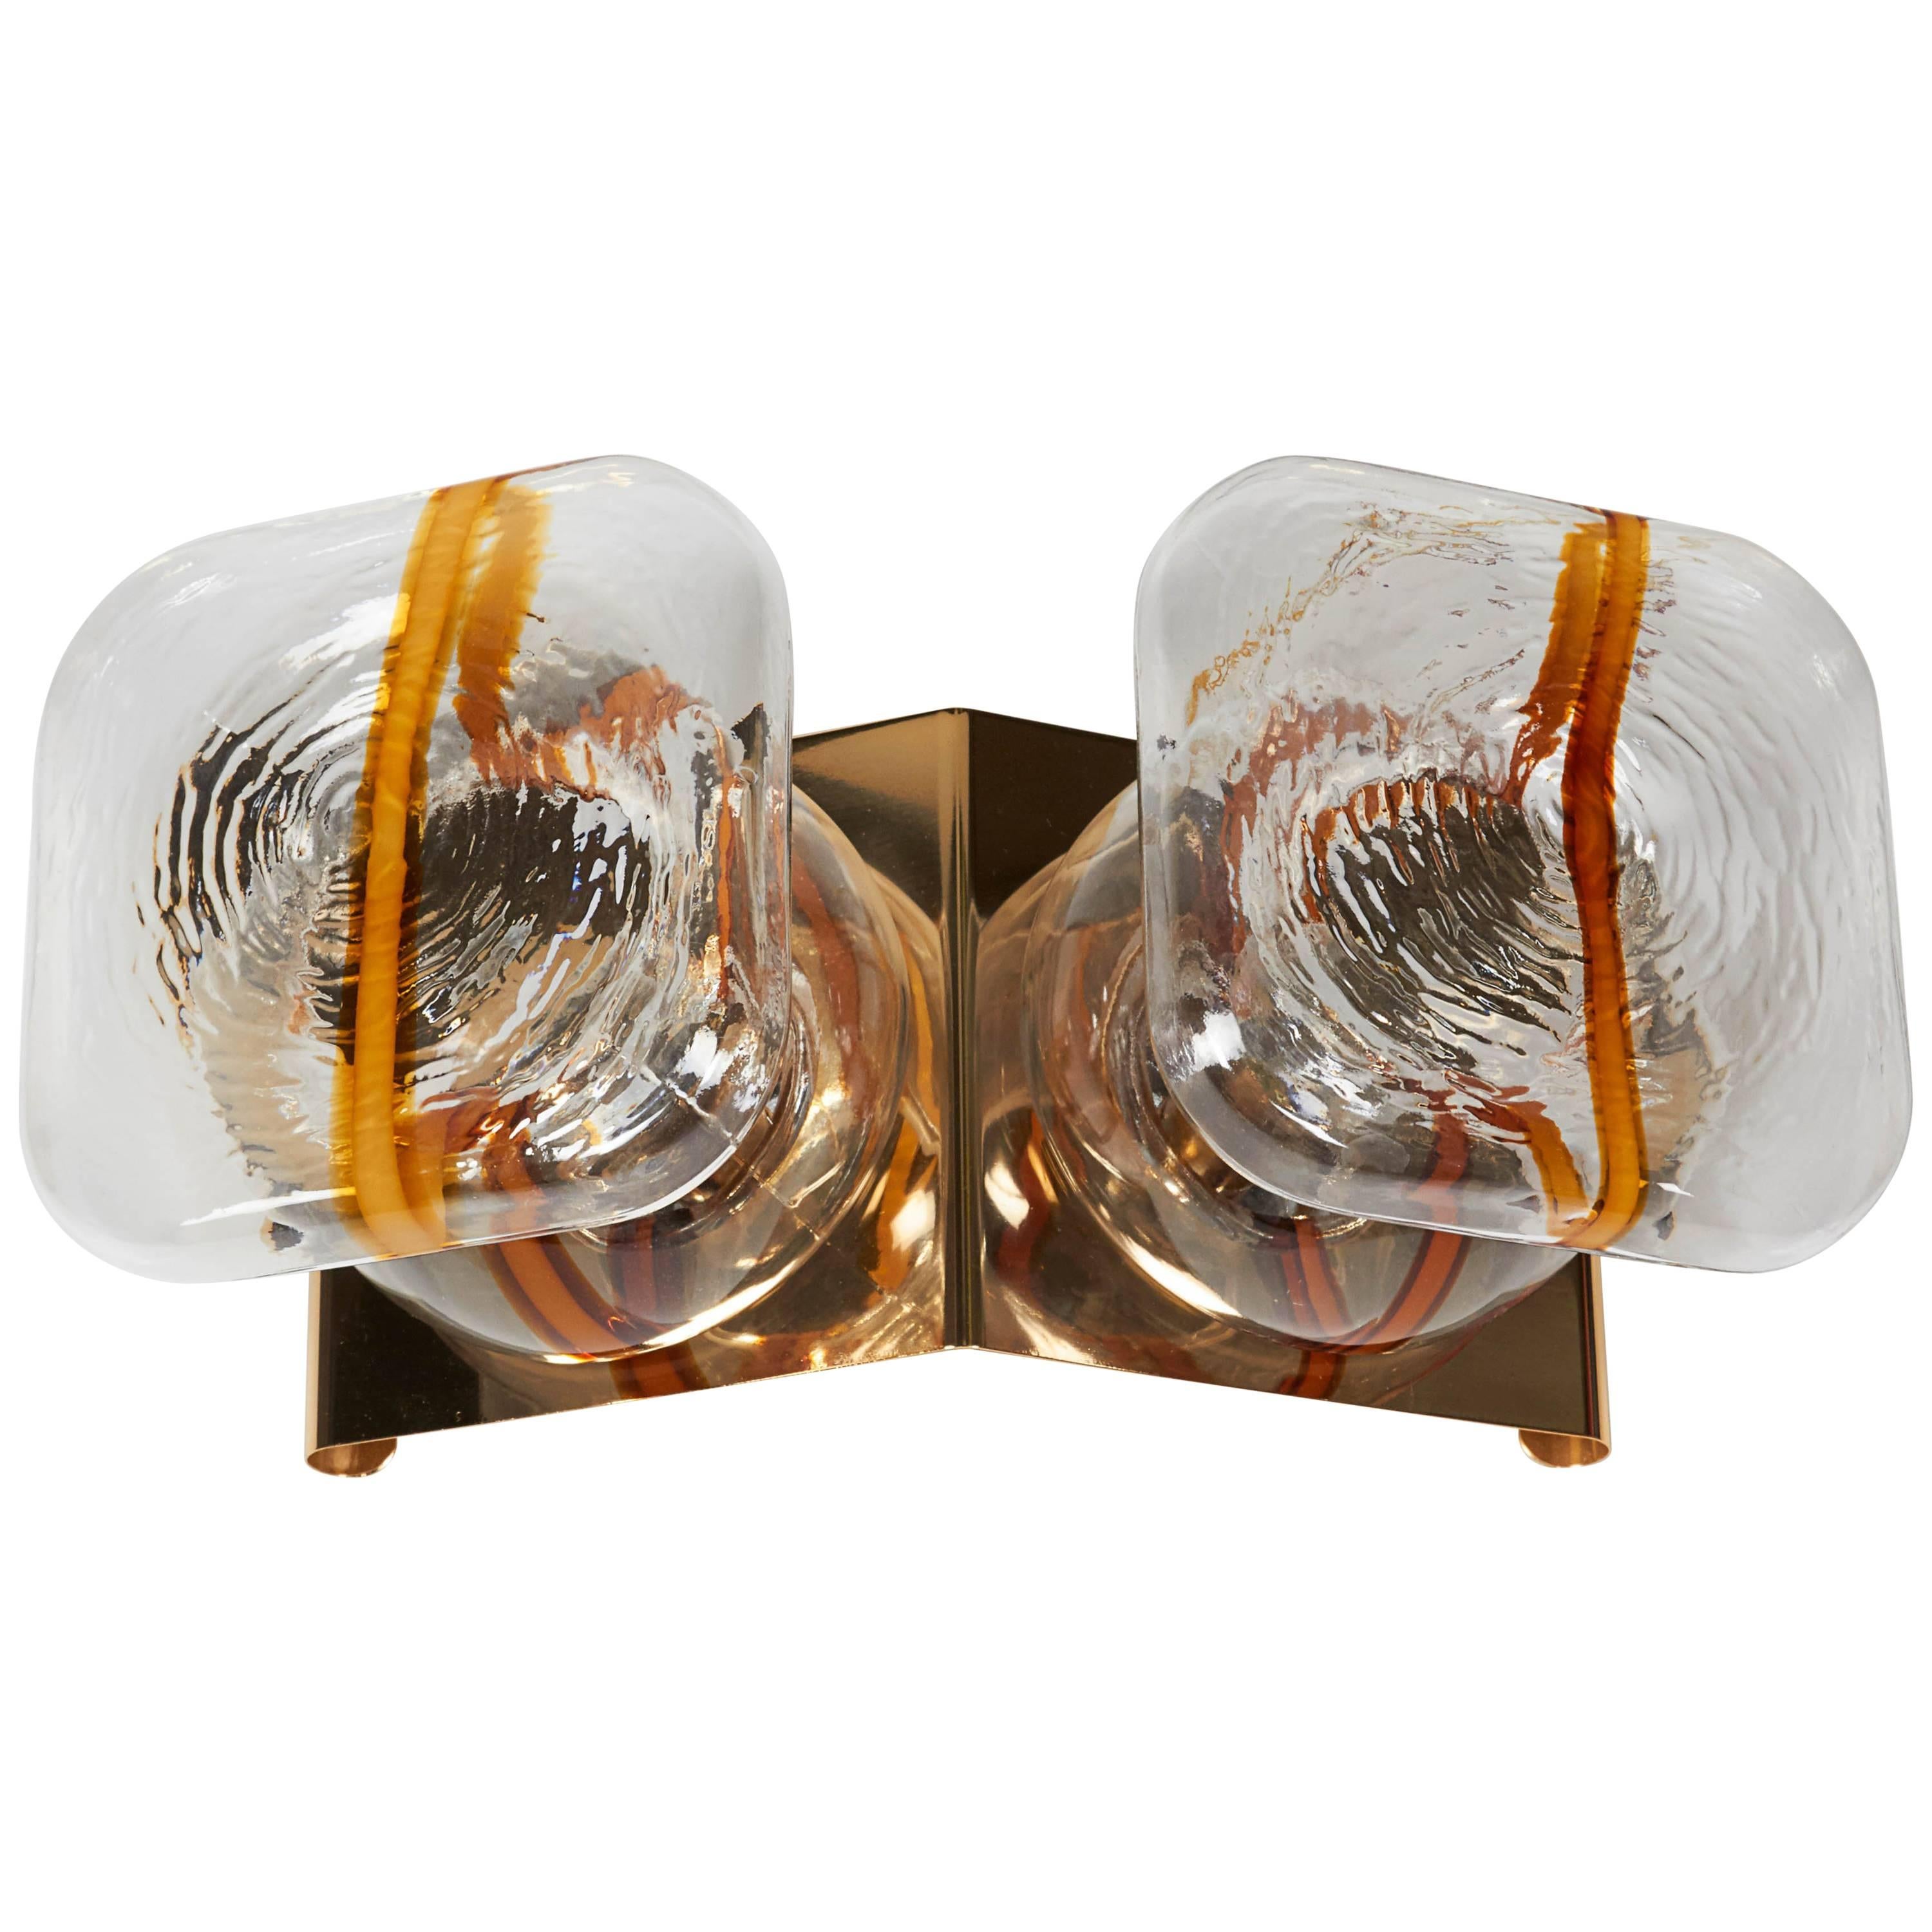 Italian 1970s Modern Gold-Plated and Glass Sconce or Ceiling Light